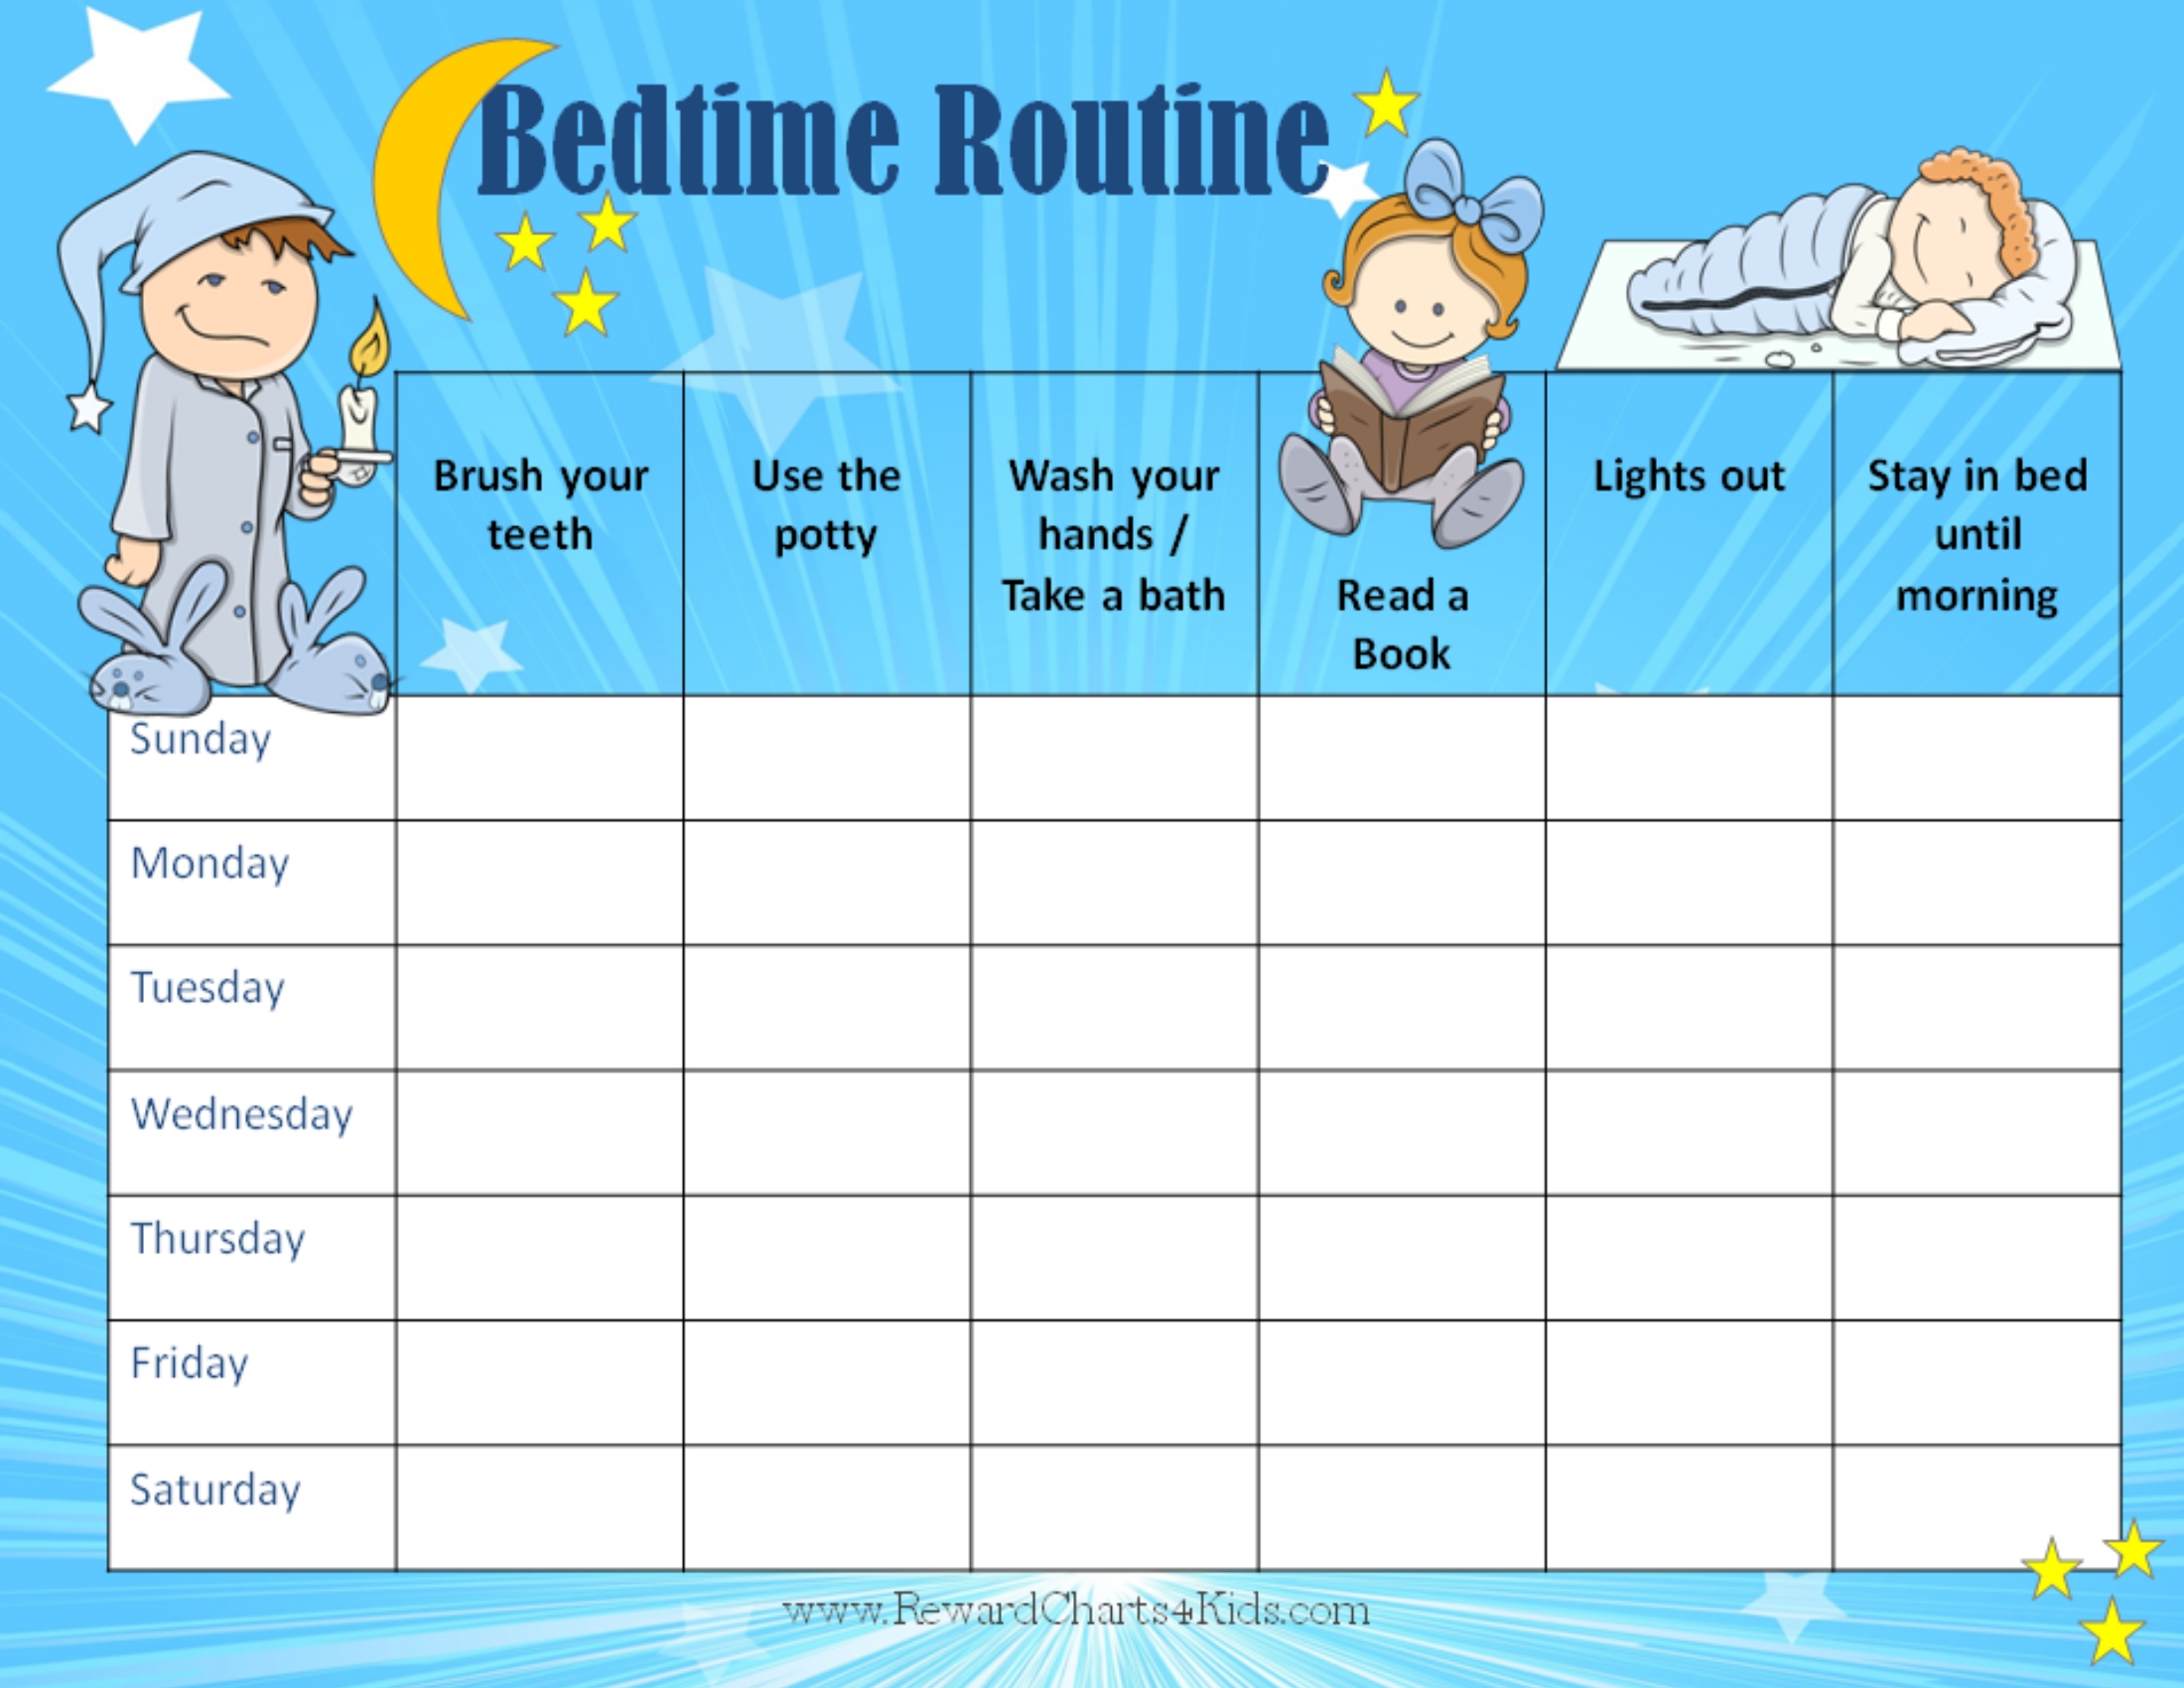 7-best-images-of-free-printable-bedtime-routine-charts-free-printable-bedtime-routine-chart